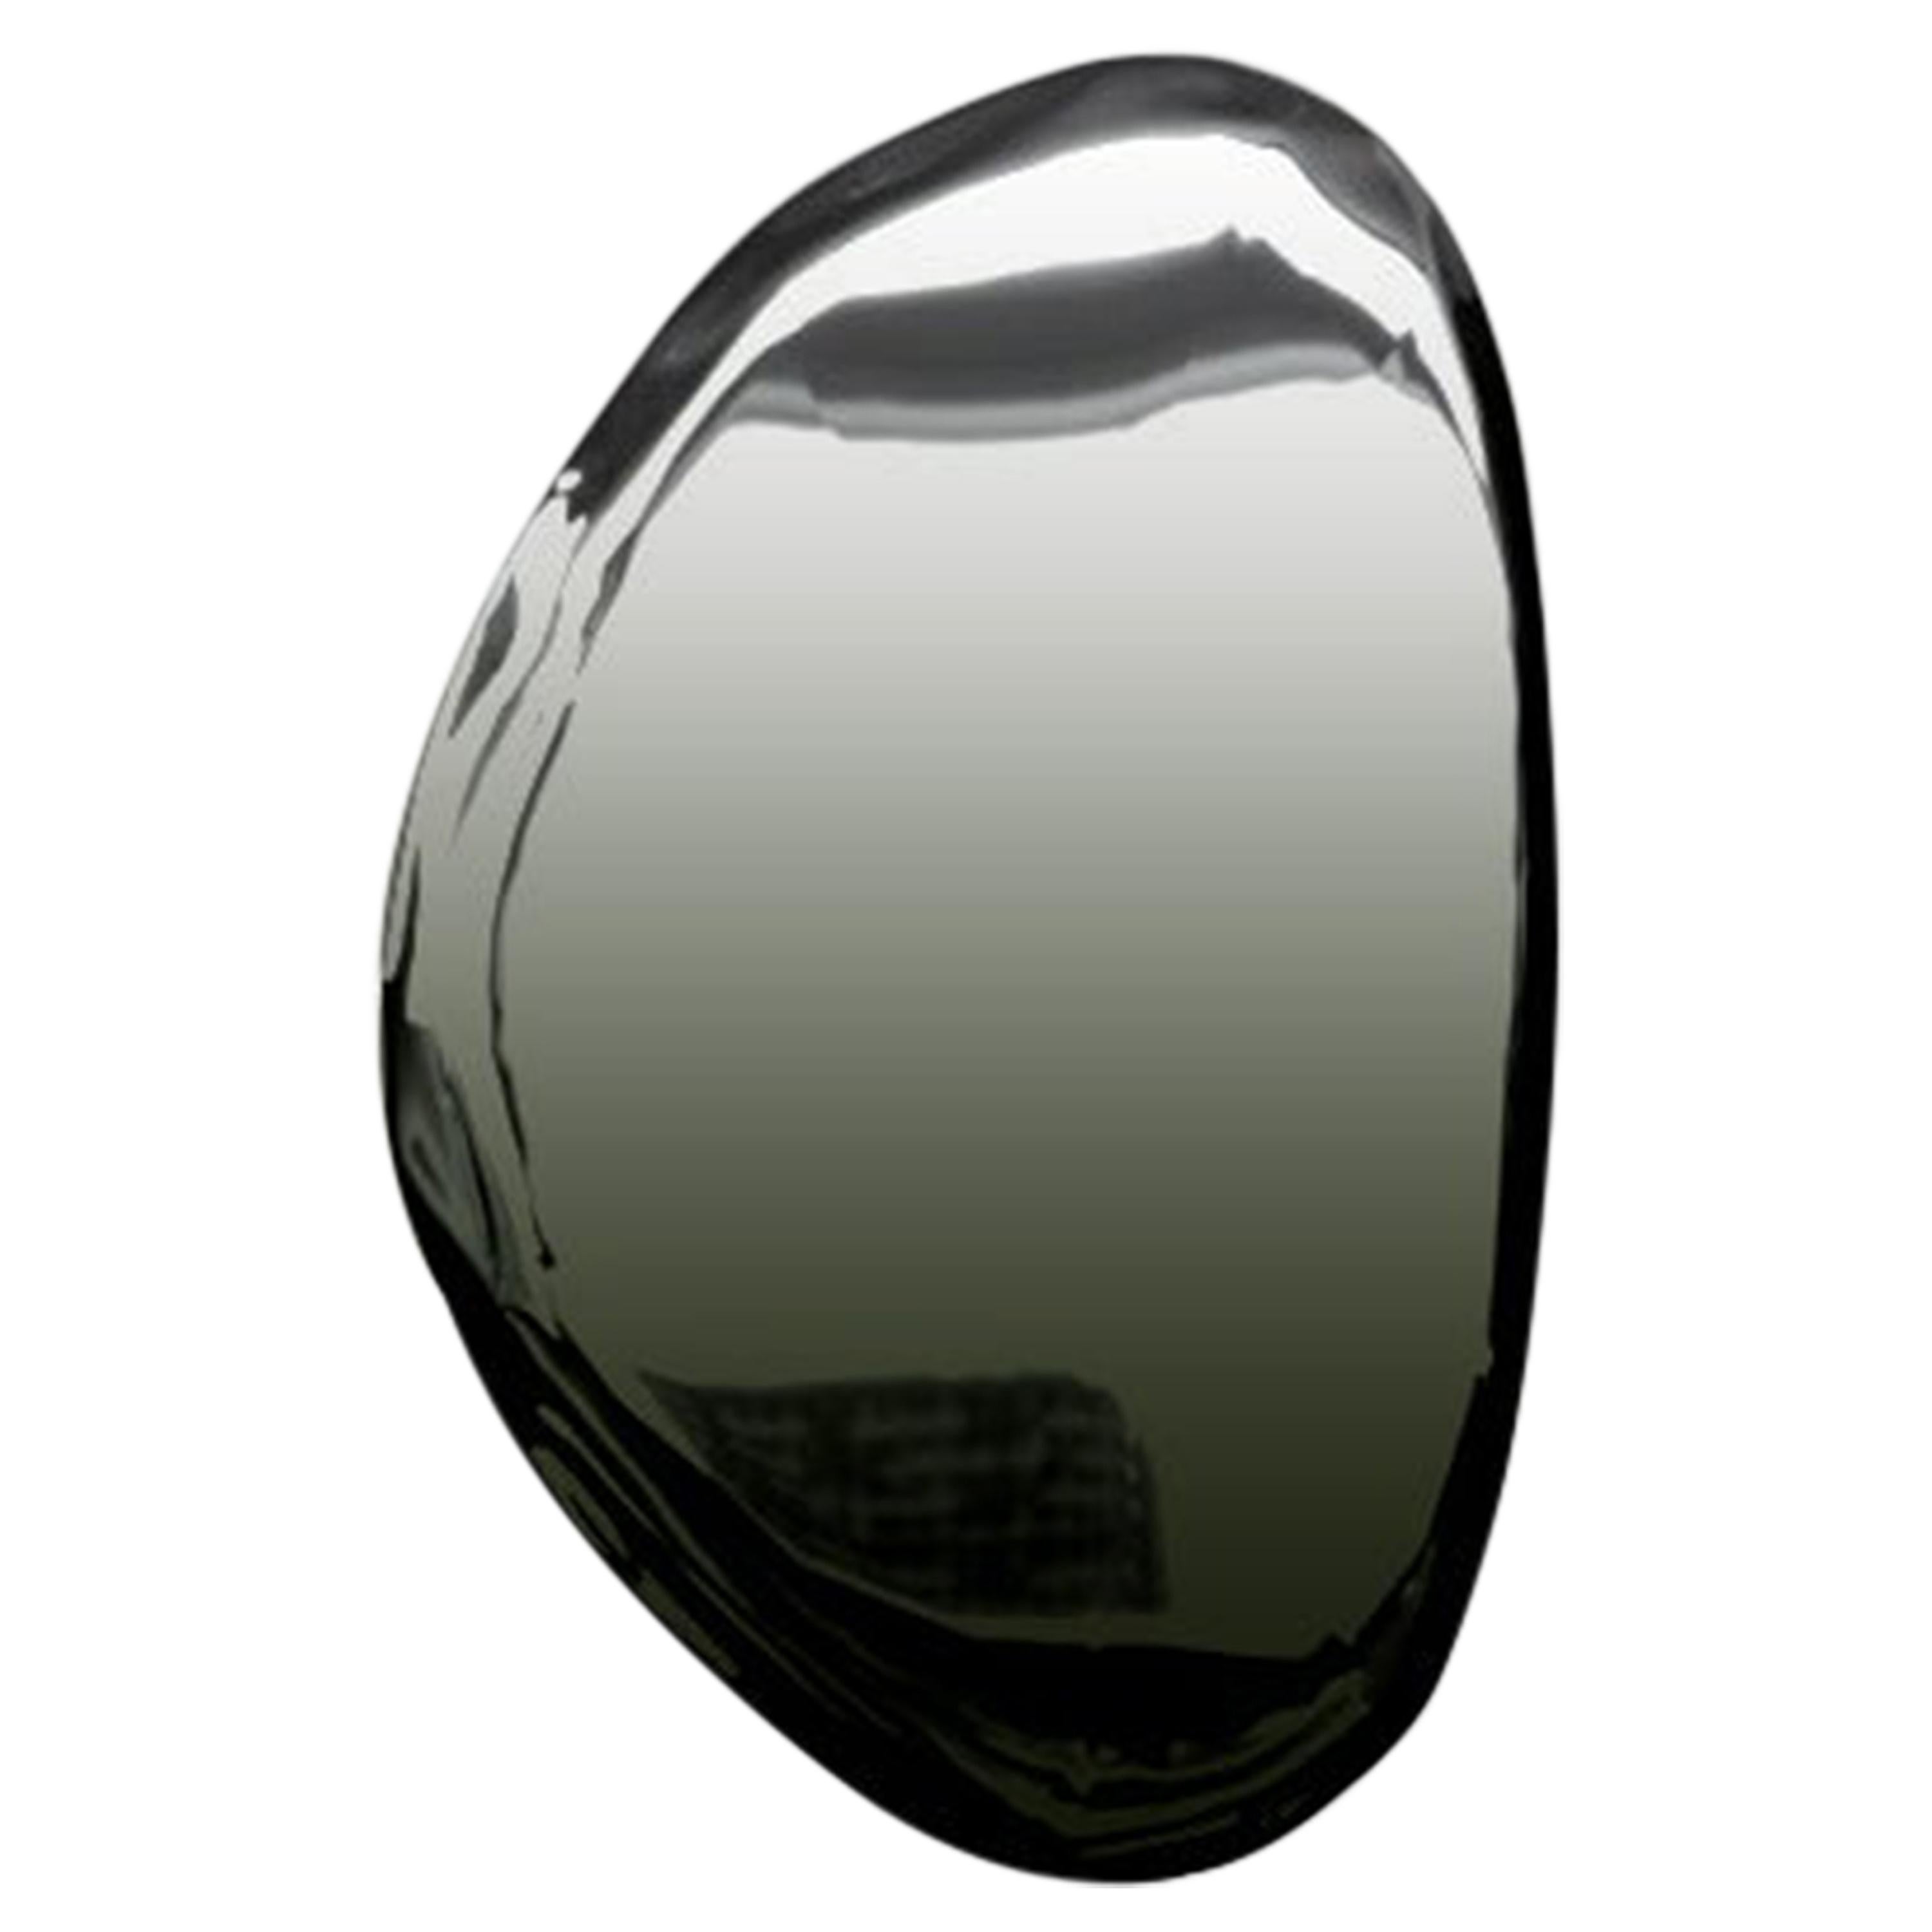 Tafla O3 Polished Dark Matter Color Stainless Steel Wall Mirror by Zieta For Sale